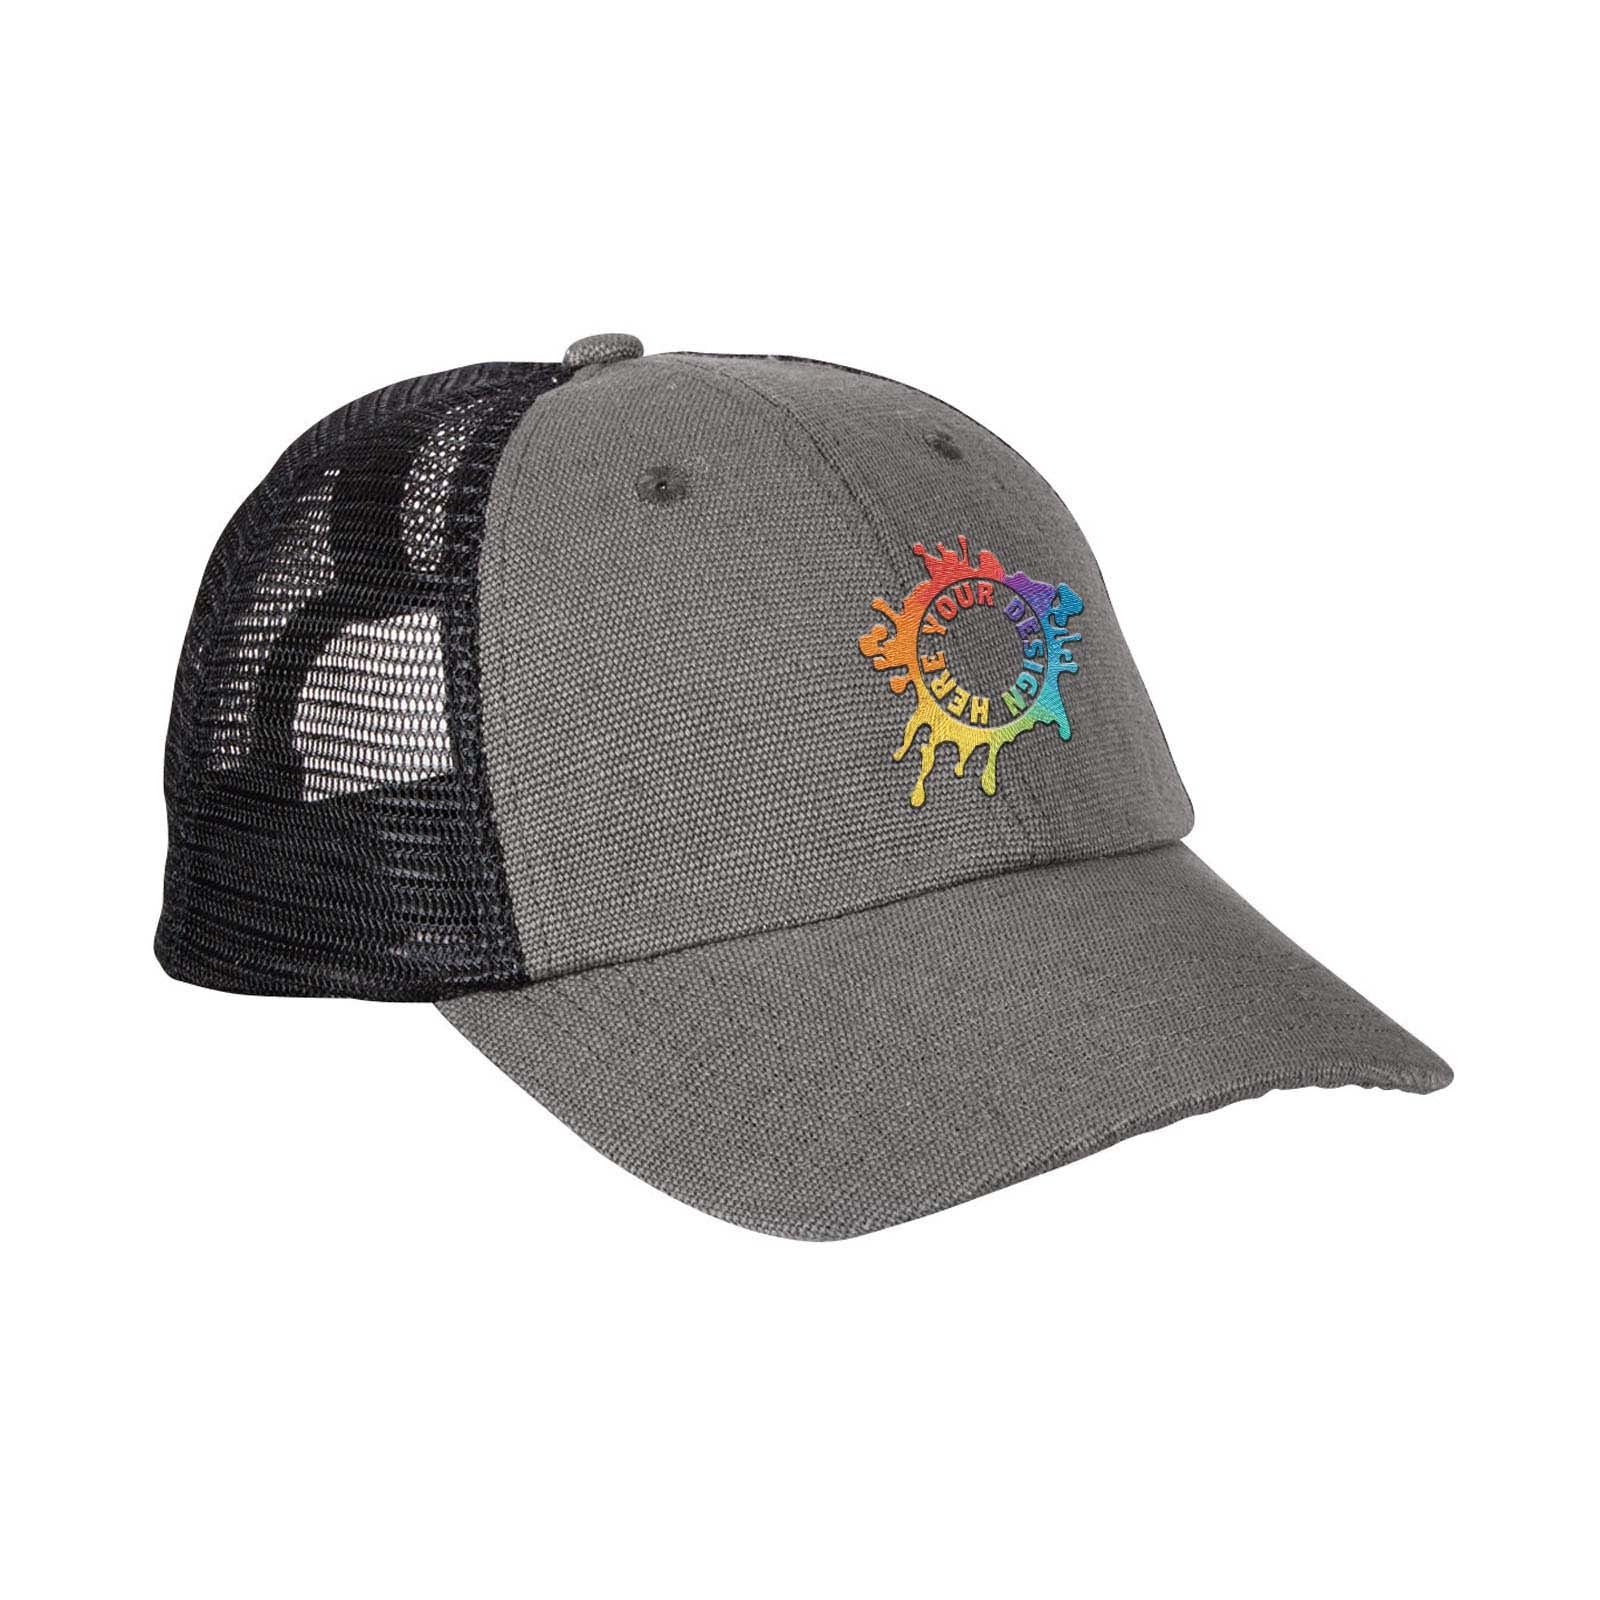 Embroidered econscious Washed Hemp Blend Trucker Hat - Mato & Hash